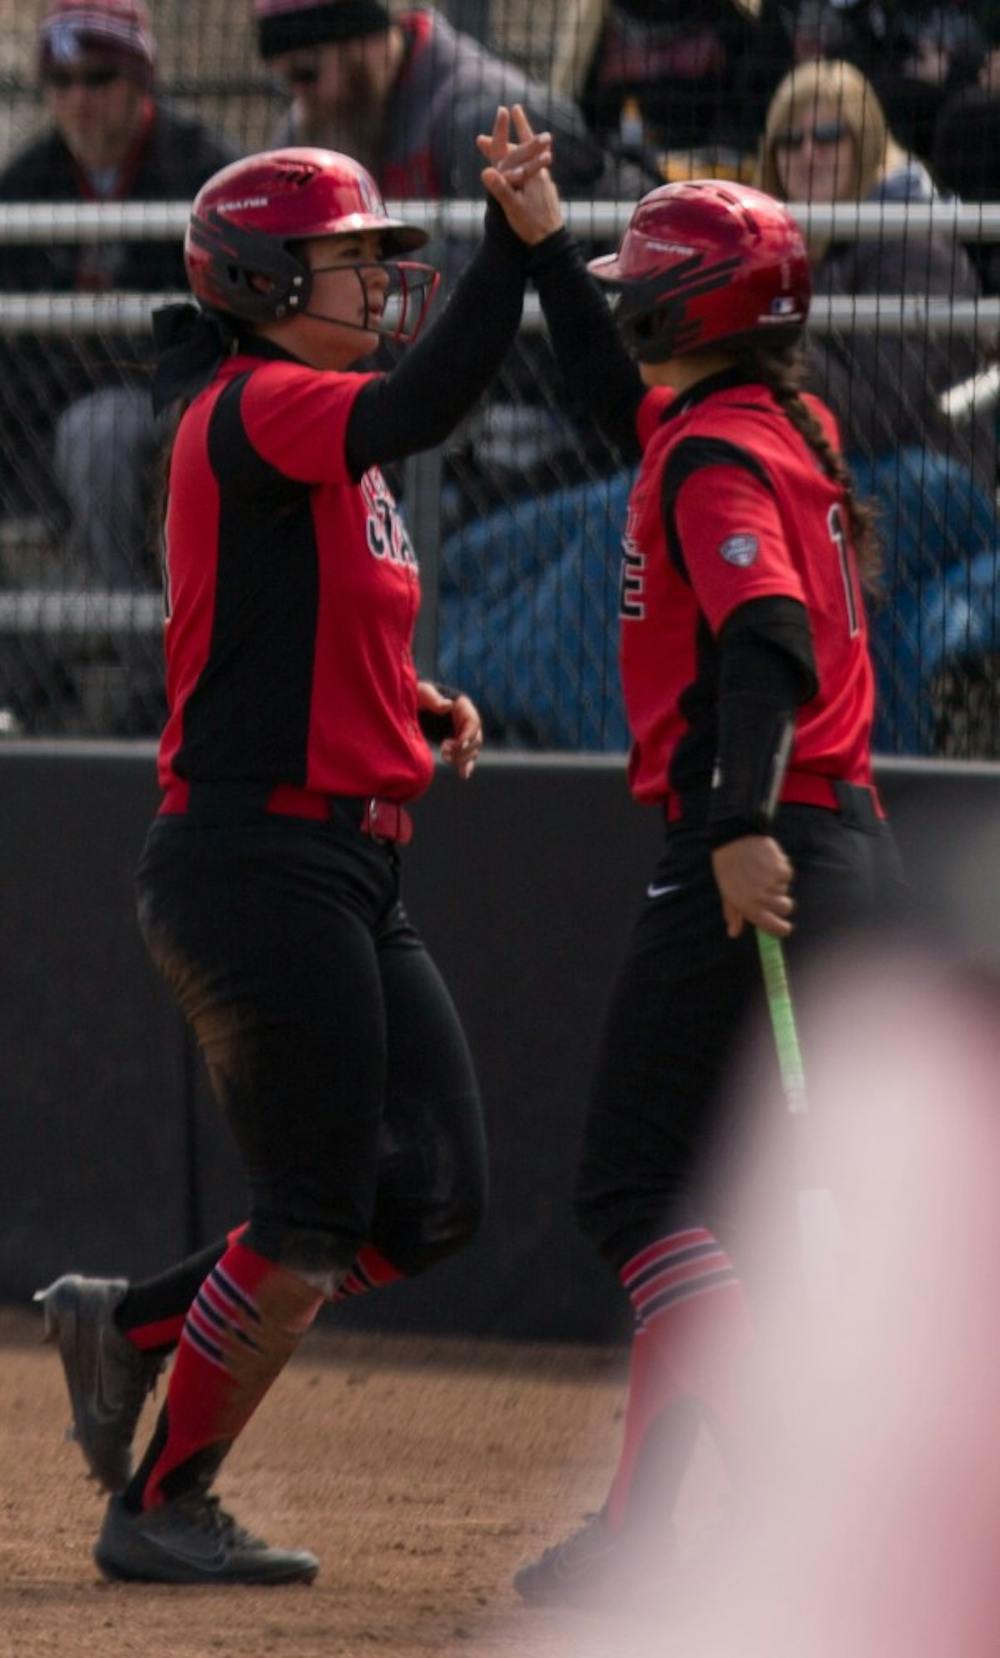 <p>Madison Lee high fives Madd Labrador after Lee scored a run in the second inning. Ball State lost to Kent State April 7 at the Softball Field at First Merchants Ballpark Complex. <strong>Eric Pritchett, DN</strong></p>